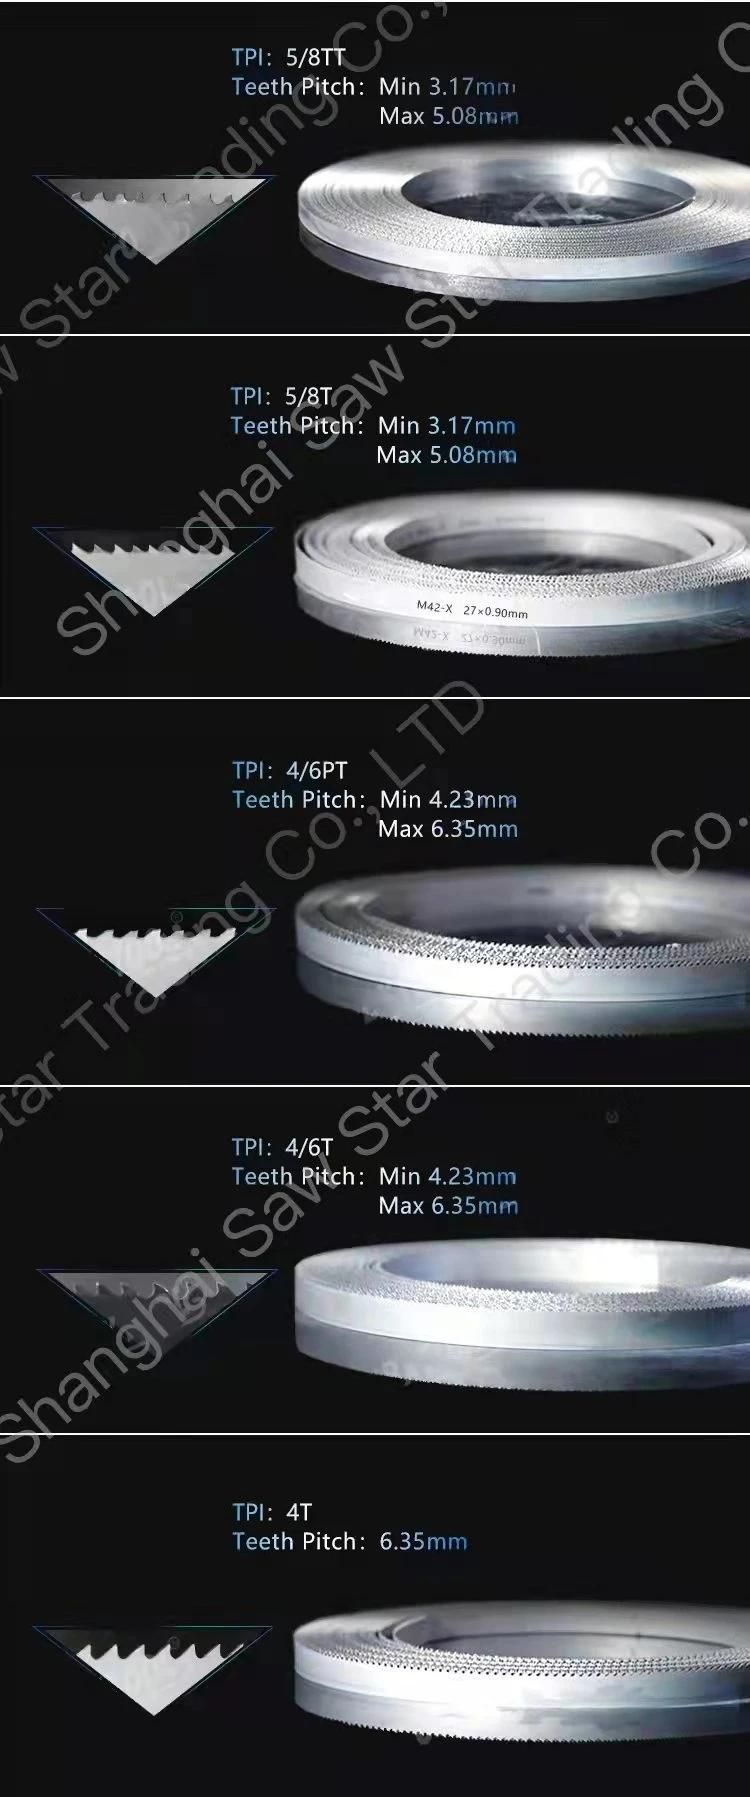 34mm * 1.1mm * 2 / 3 Tooth Saw Blade for Cutting The Best Quality